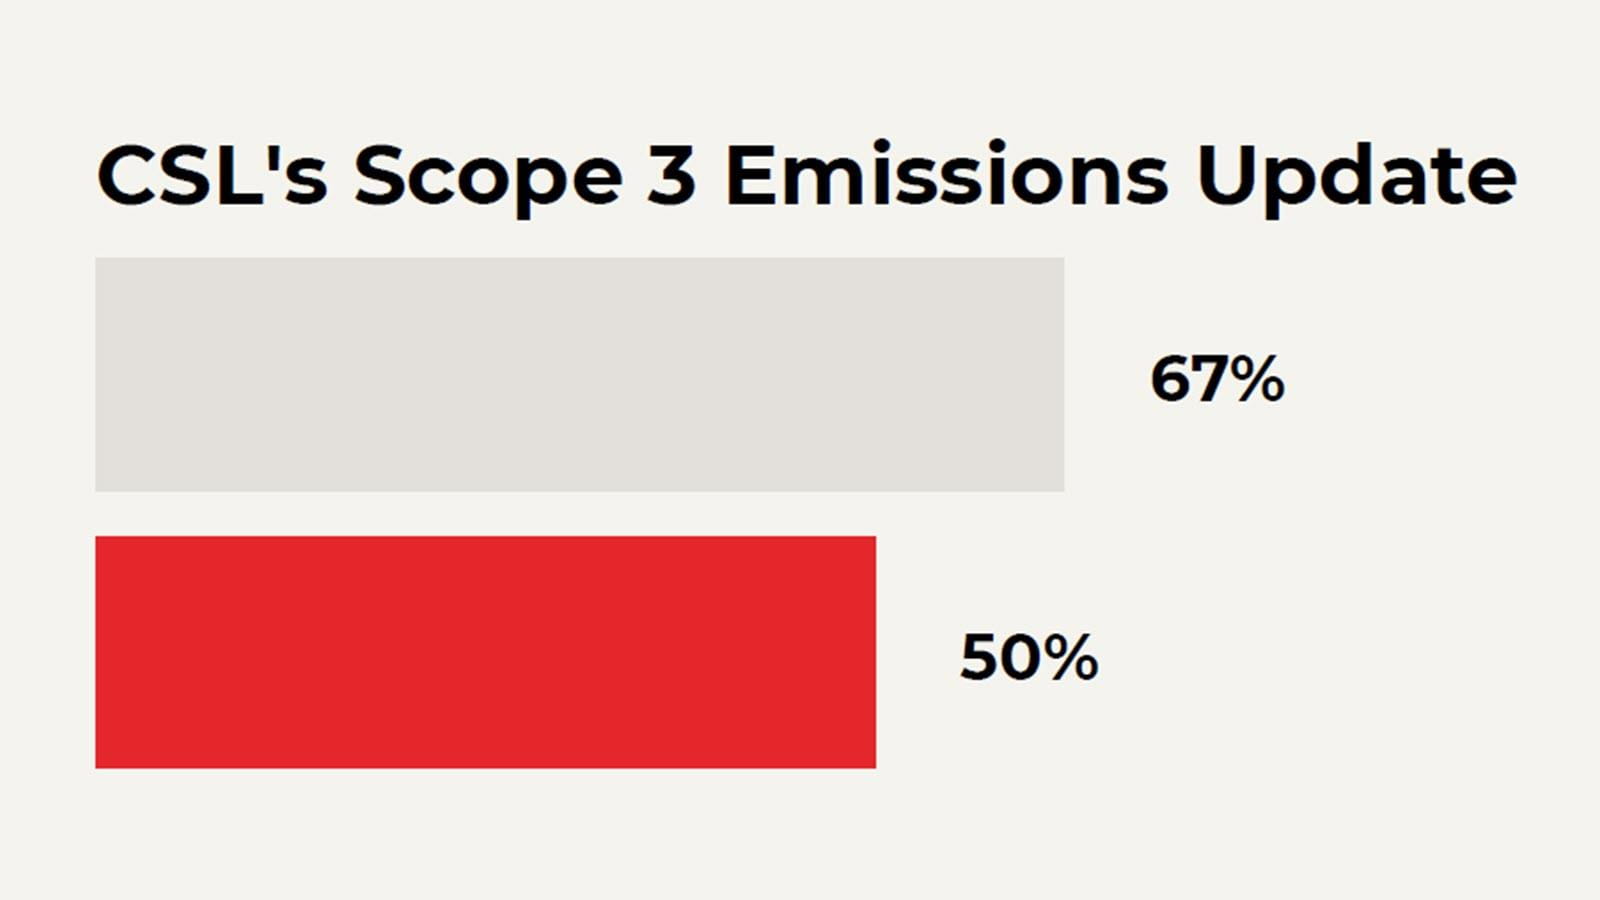 Progress bars showing CSL has achieved a portion of its Scope 3 emissions goal (50% of 67%)